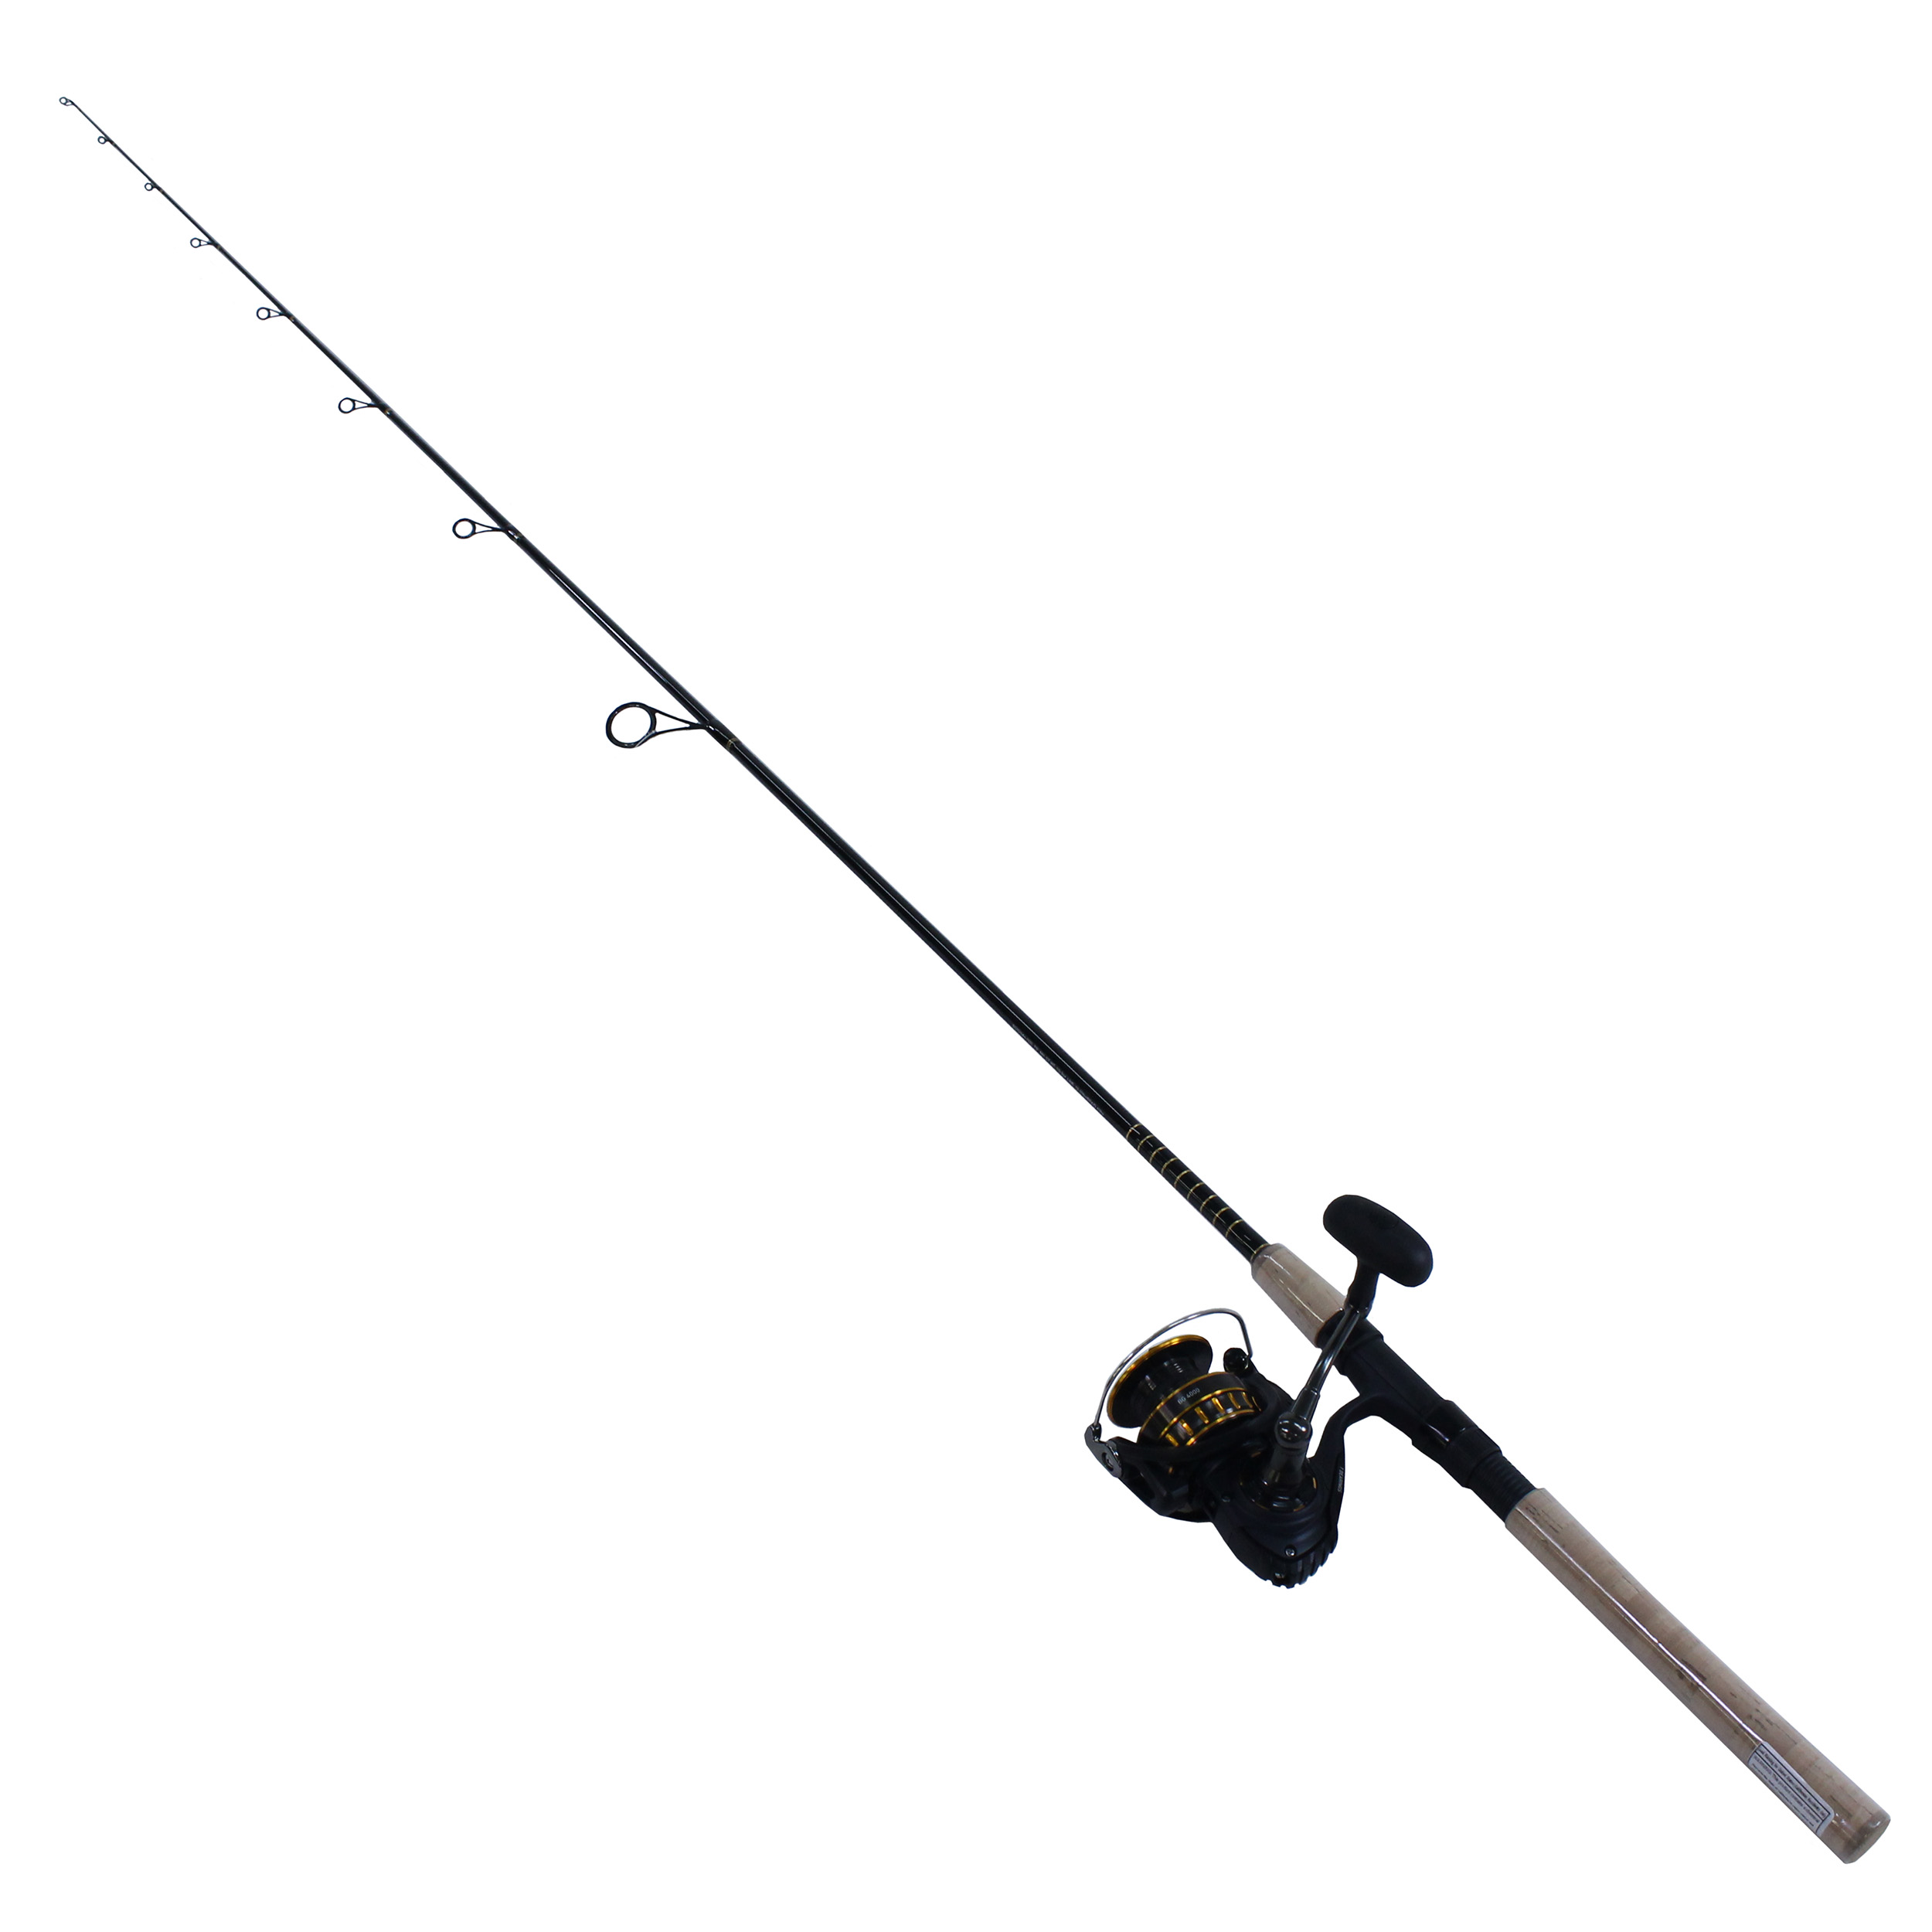 Daiwa BG 4000 Spinning Rod and Reel Combo , Up to $15.50 Off with